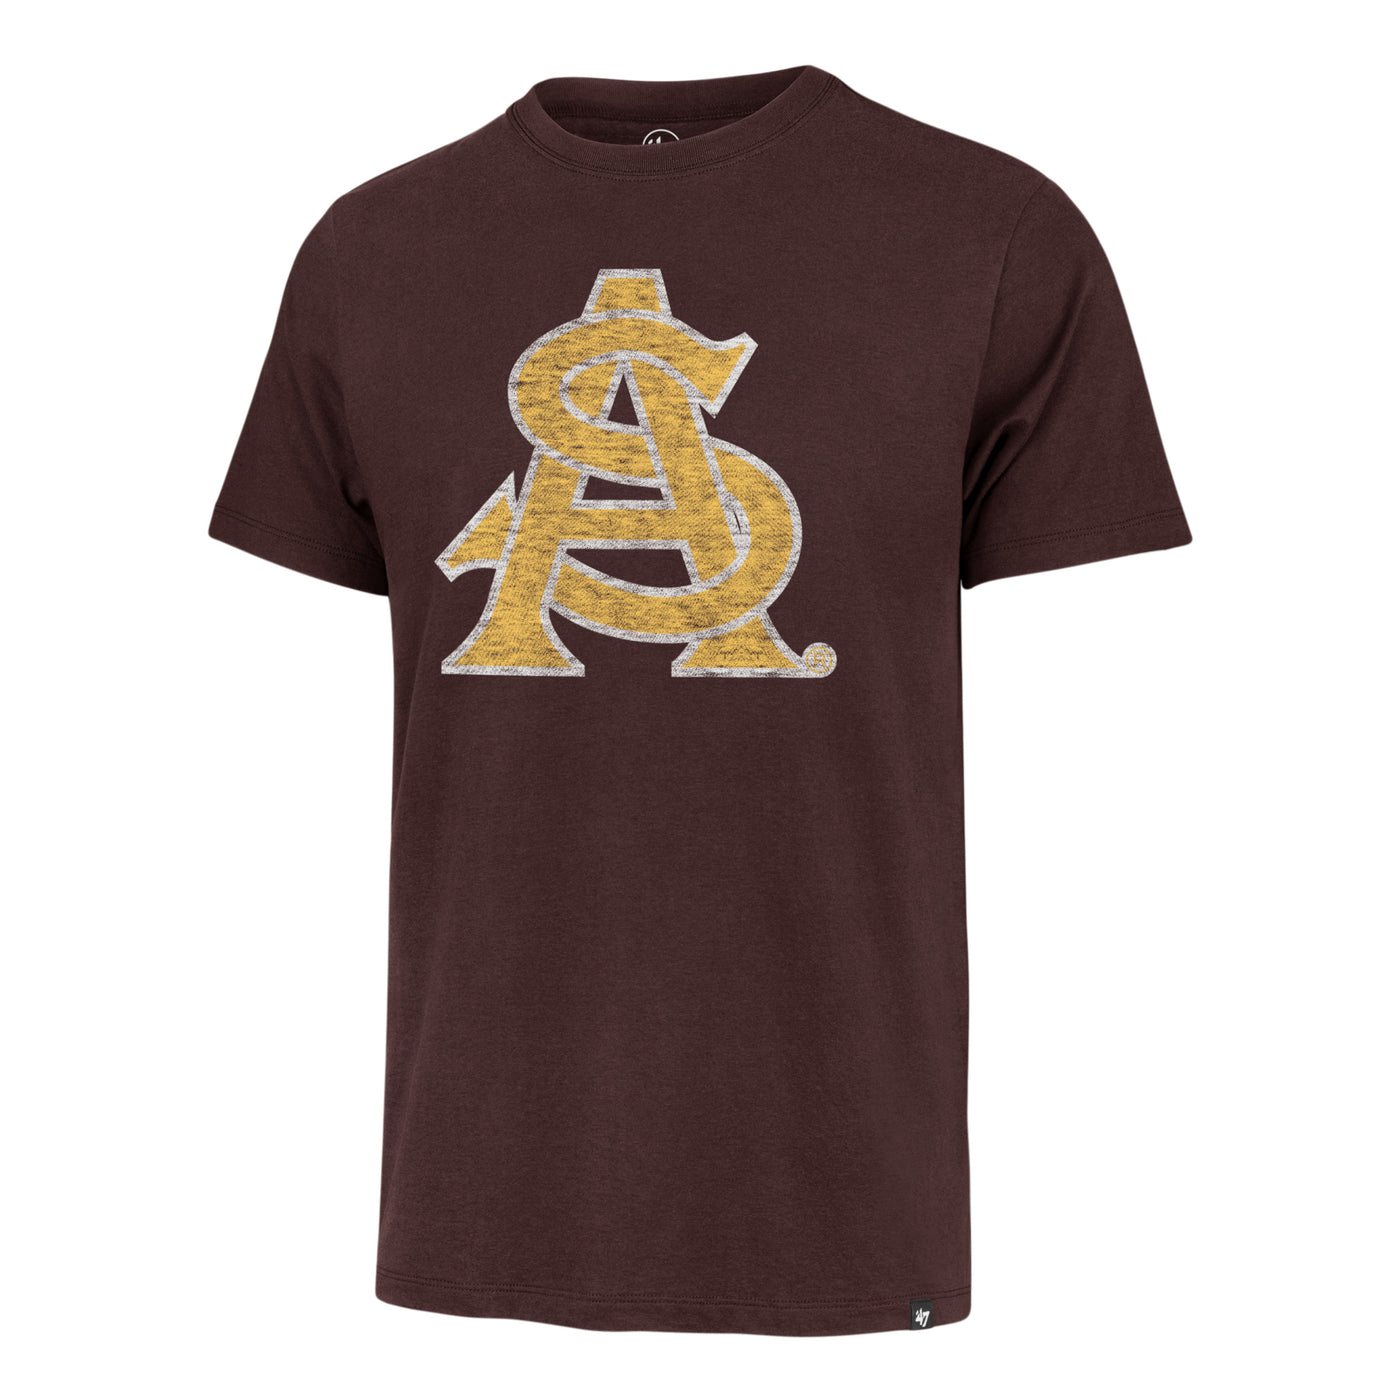 ASU maroon tee with the old school A and S logo in gold and white. 